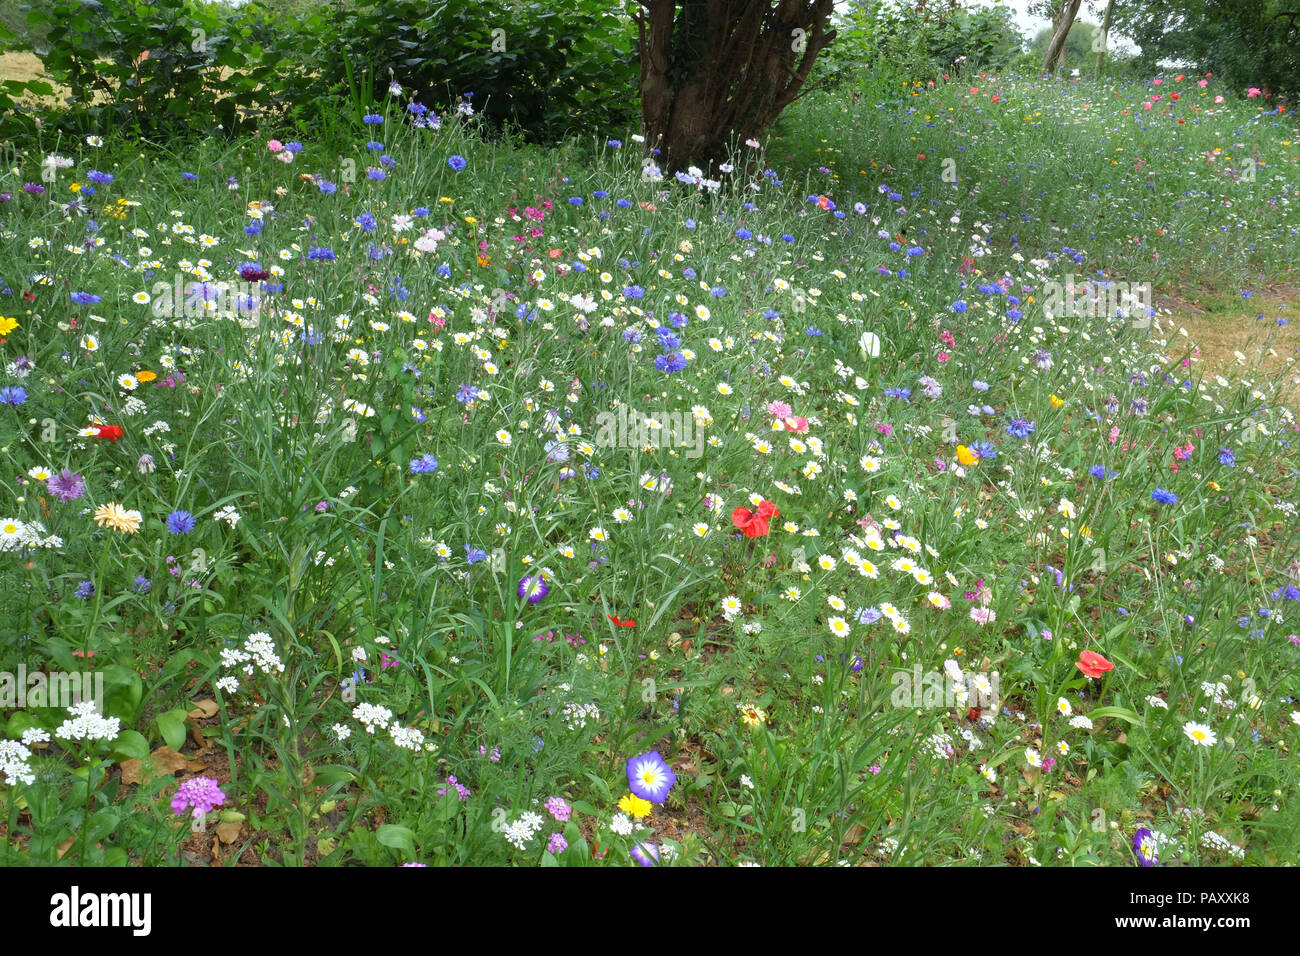 Wildflowers in an English Country garden, Shropshire. Stock Photo